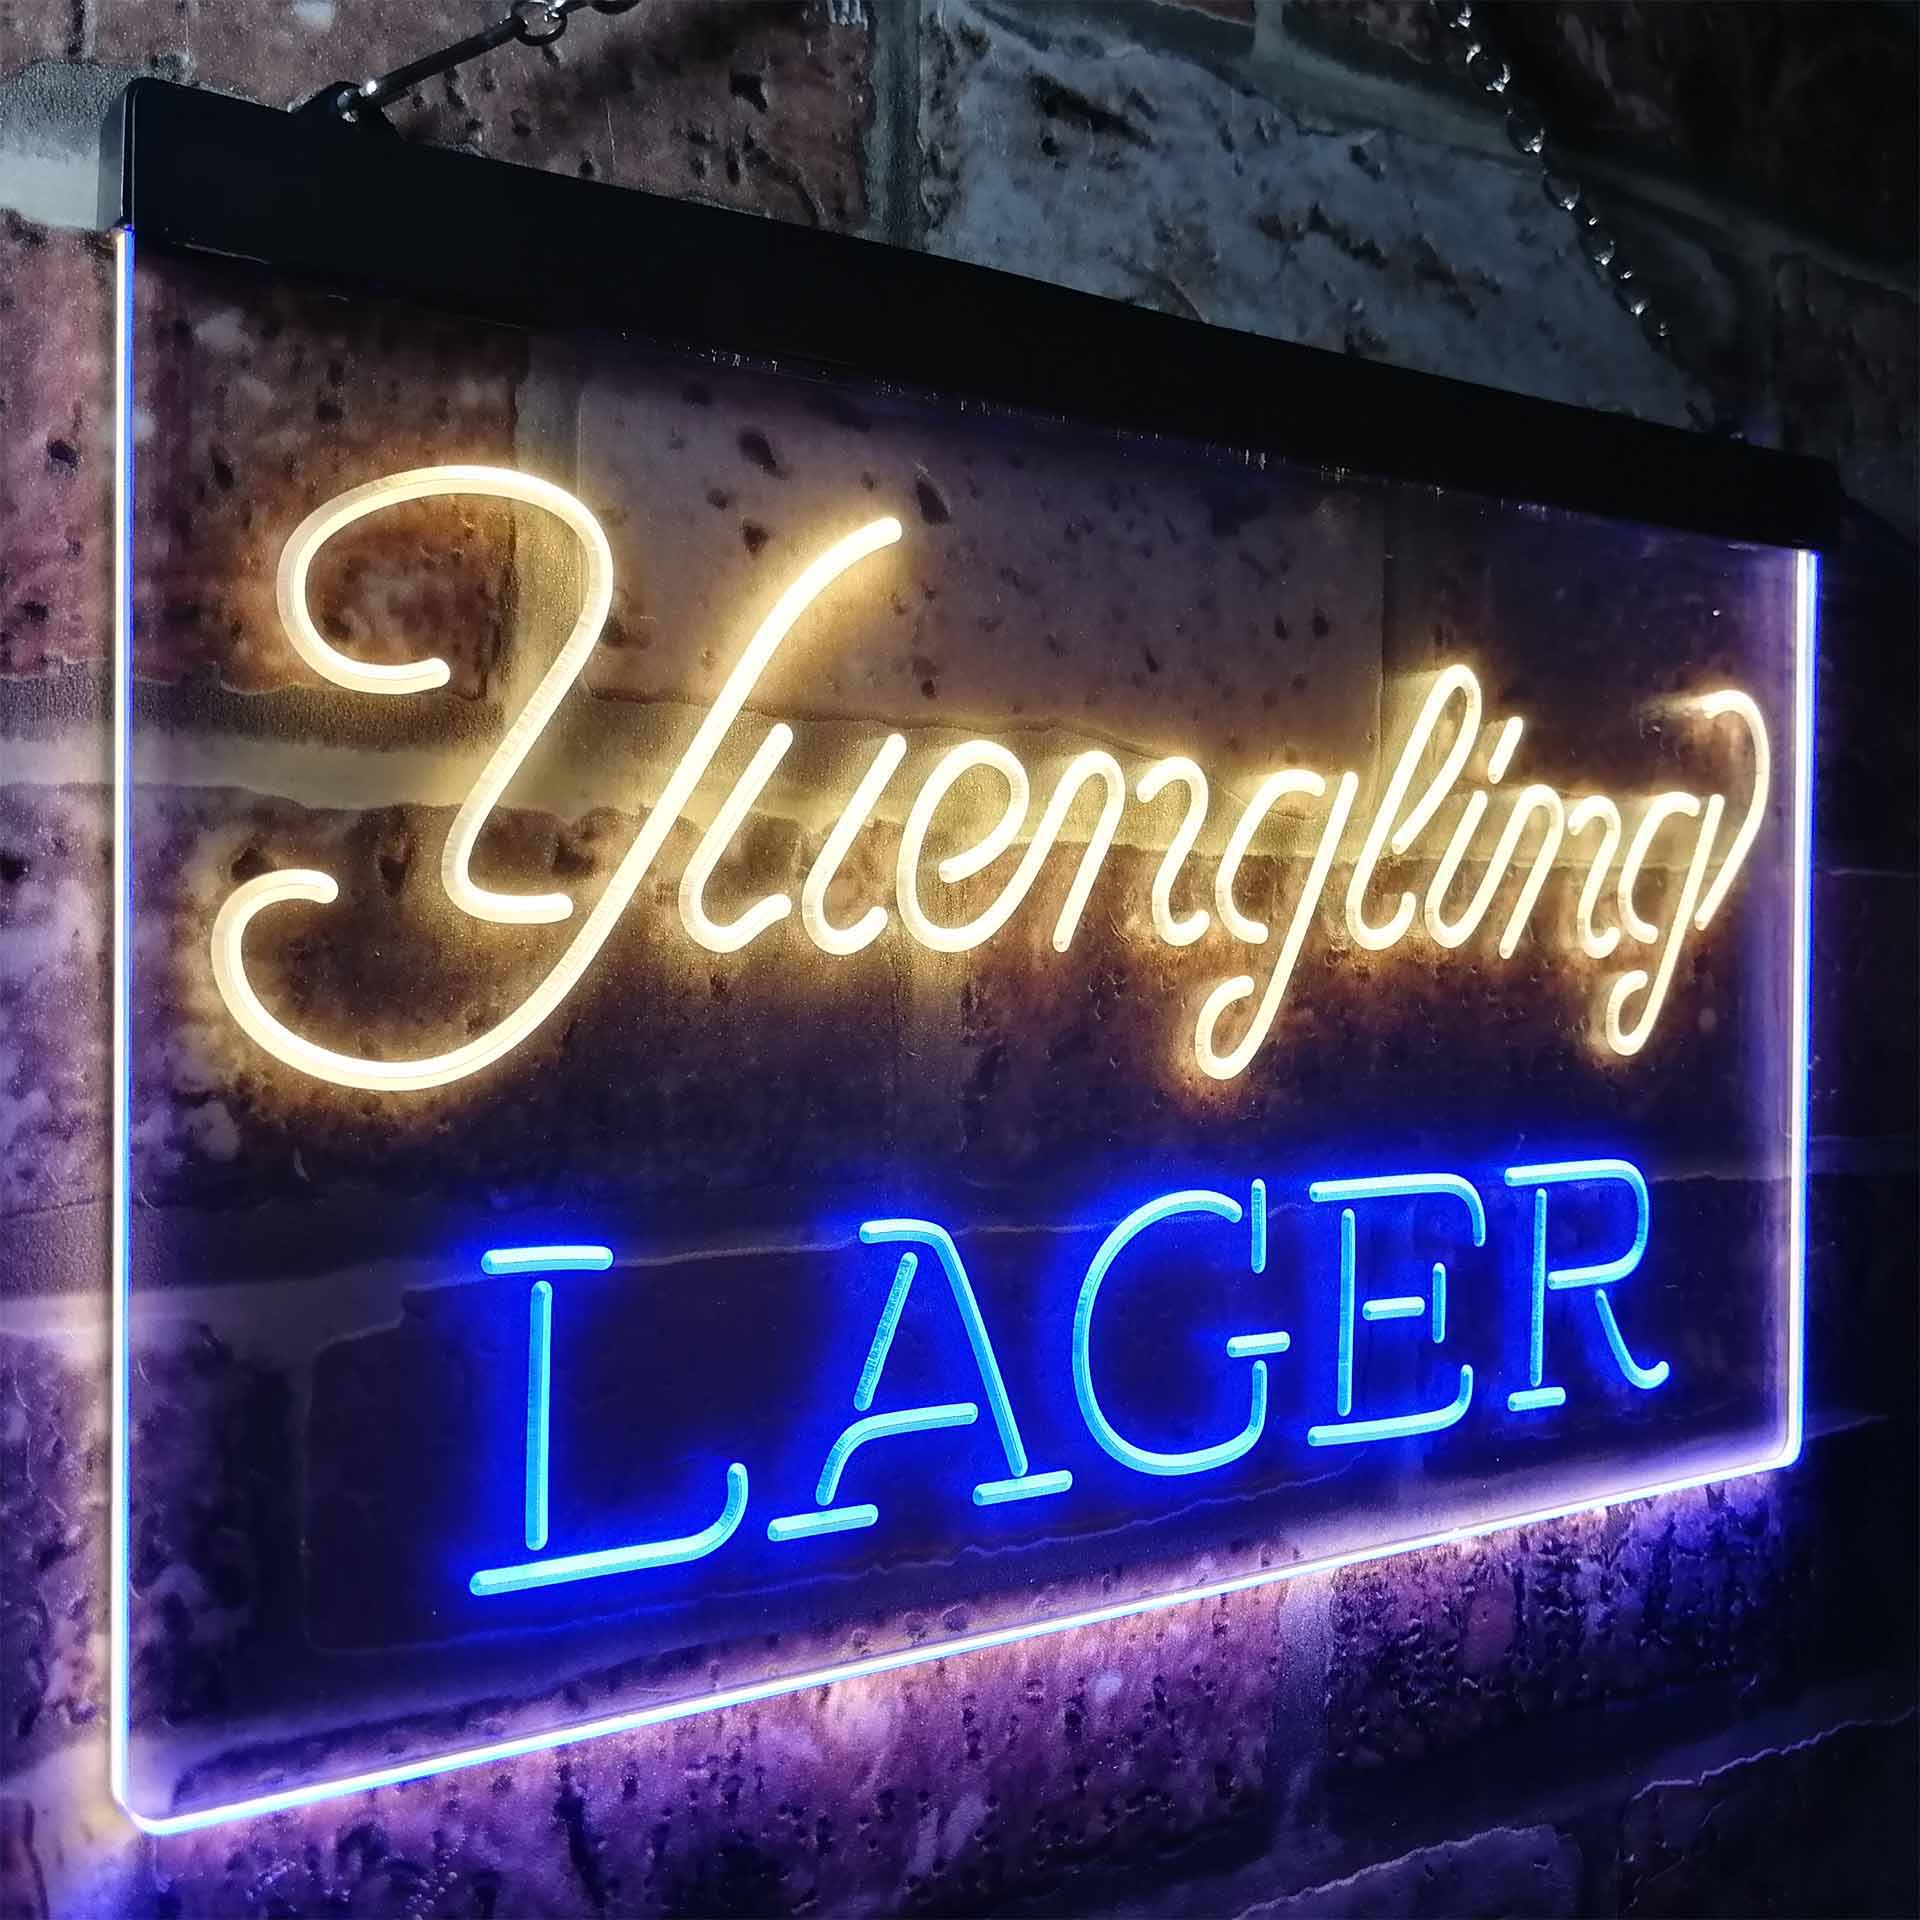 Yuengling Larger Beer Neon-Like LED Sign